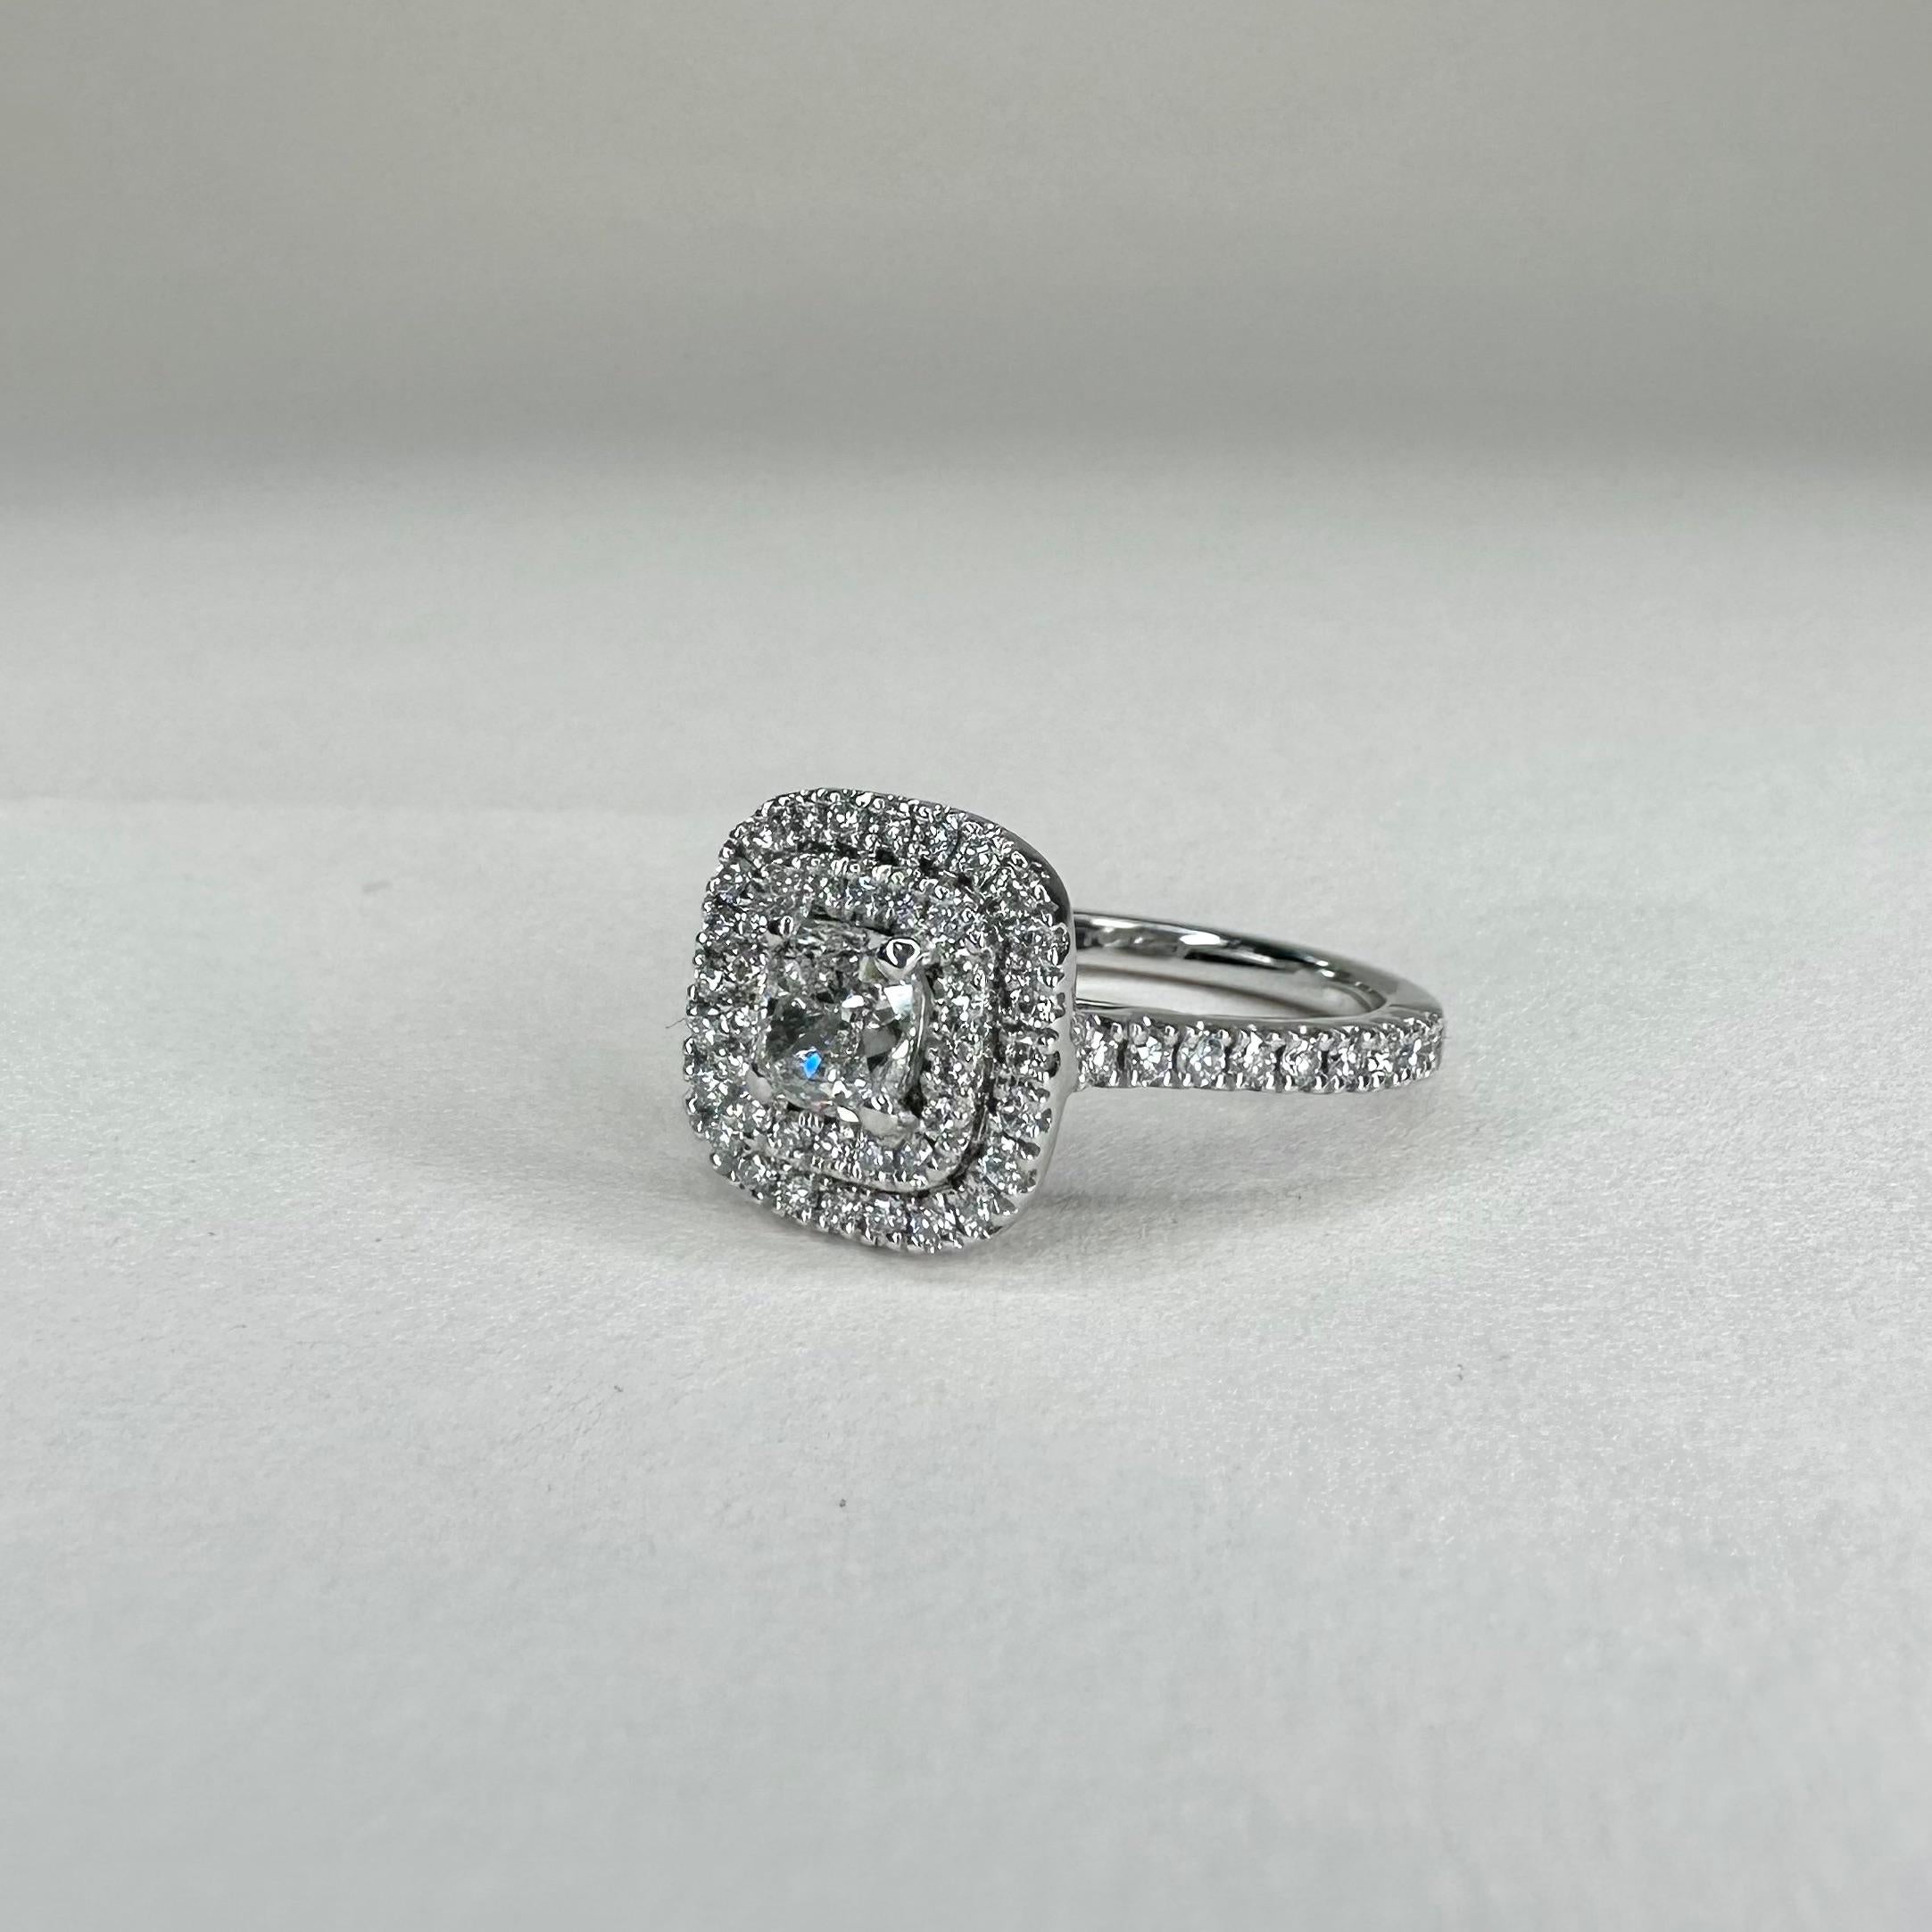 For Sale:  Art Deco Style 18k White Gold 0.70 Ct Diamond Ring GIA Certified with 0.55 Cts 5